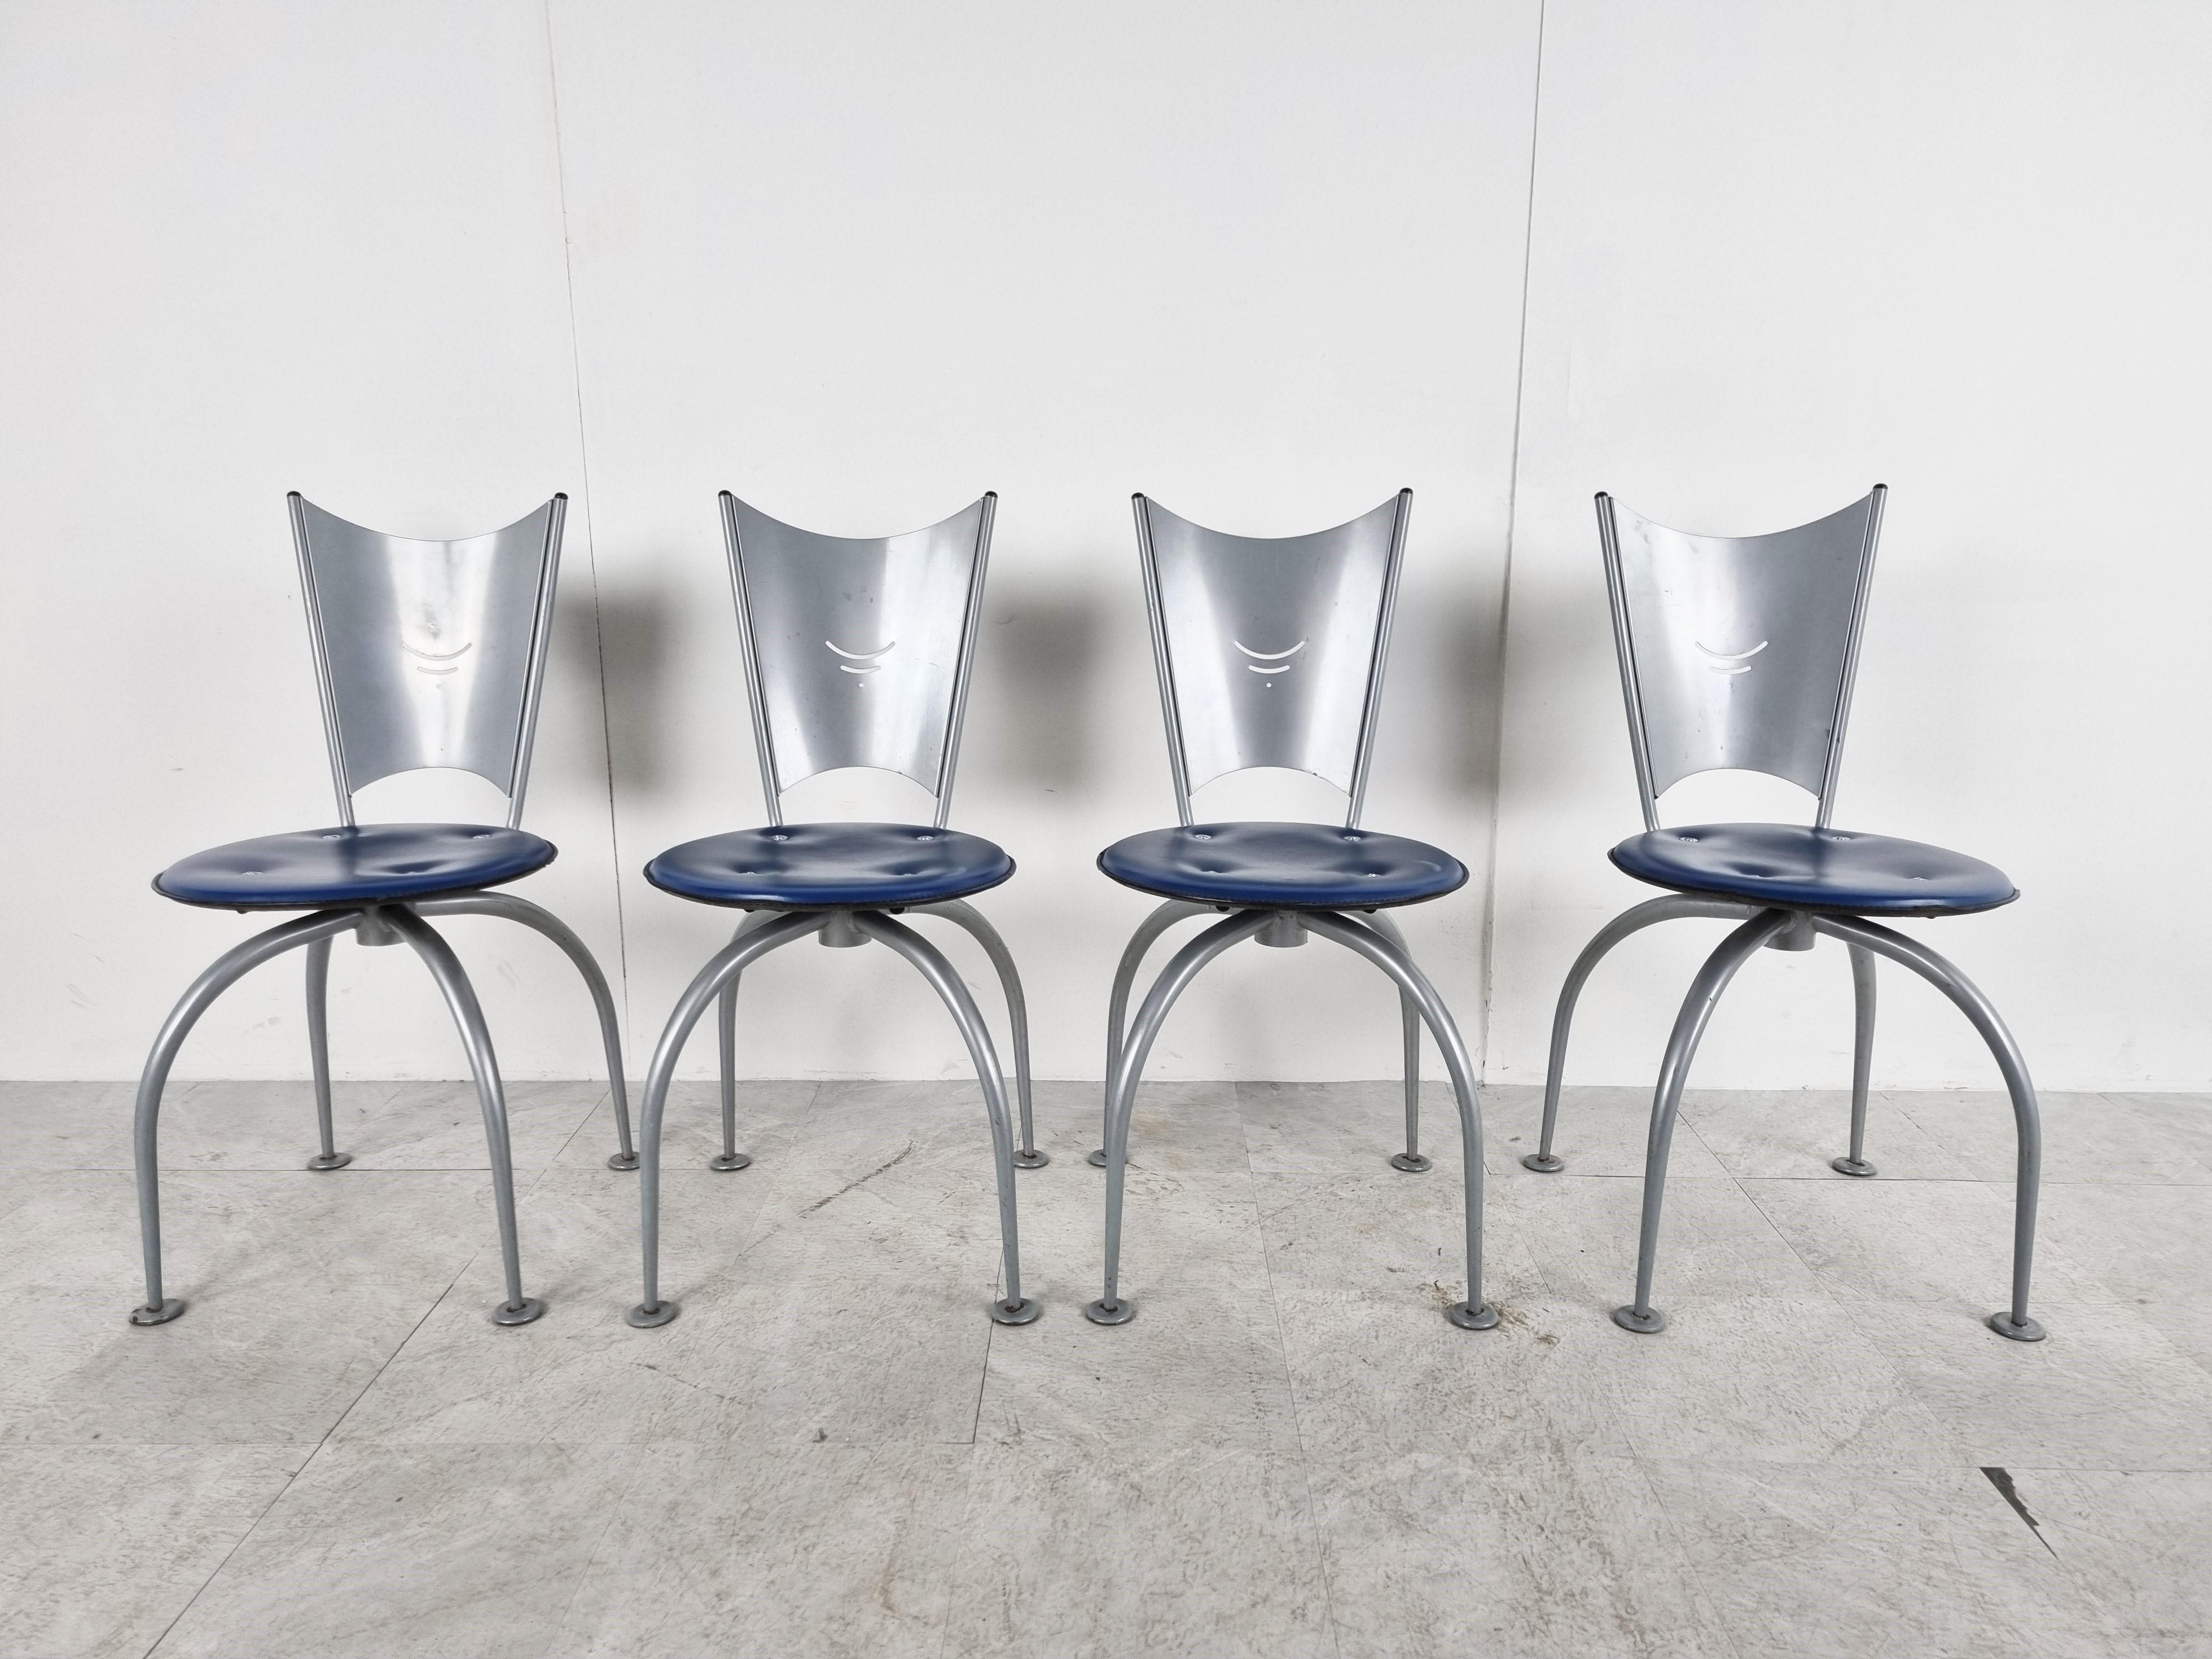 Post-Modern Post Modern Metal Dining Chairs, 1990s For Sale